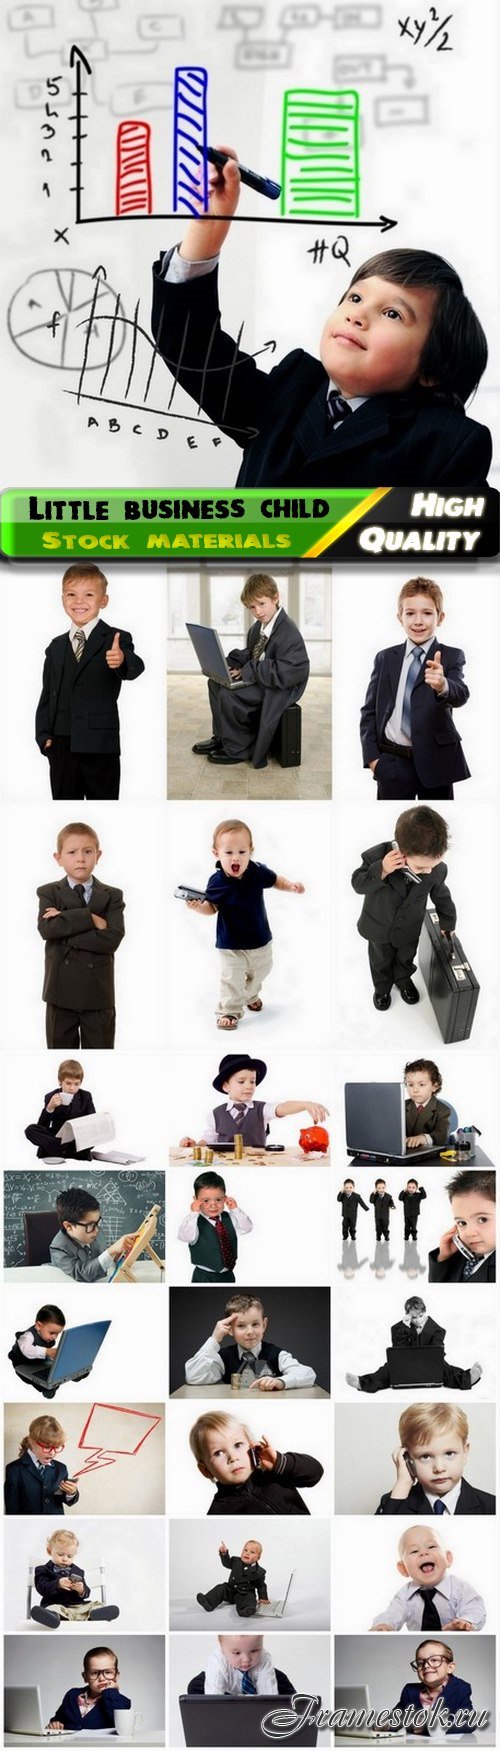 Little funny business child and kids in formal suit - 25 HQ Jpg